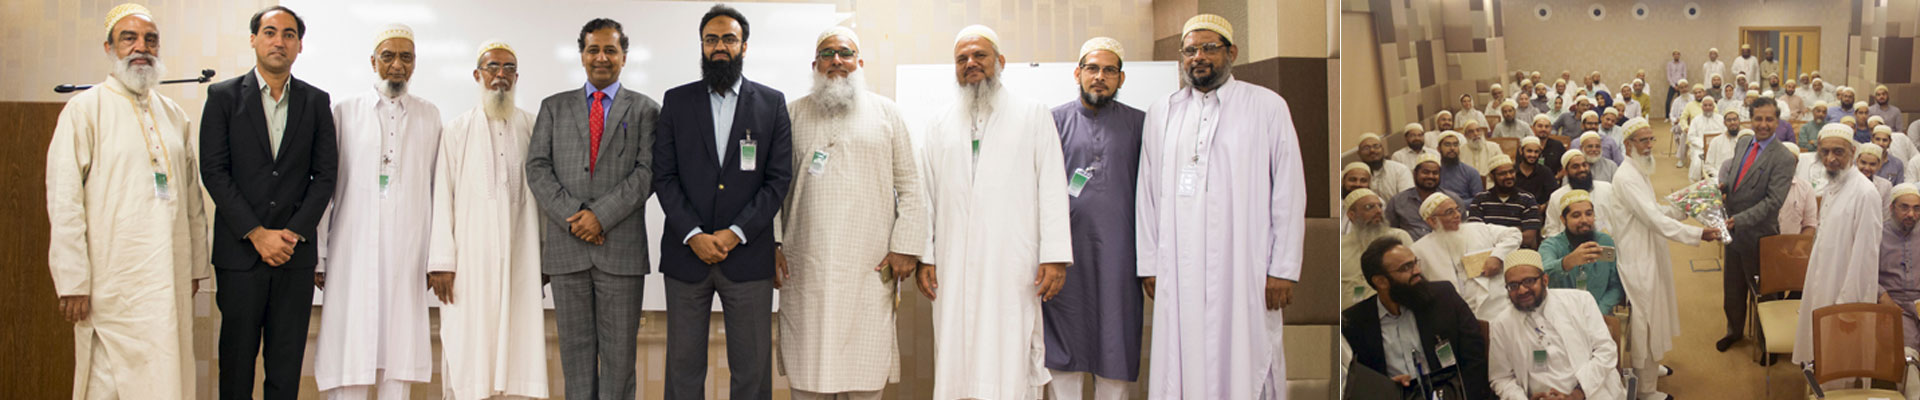 CEE hosted Seminar on Growth & Opportunities for Family Businesses for Dawoodi Bohra Community